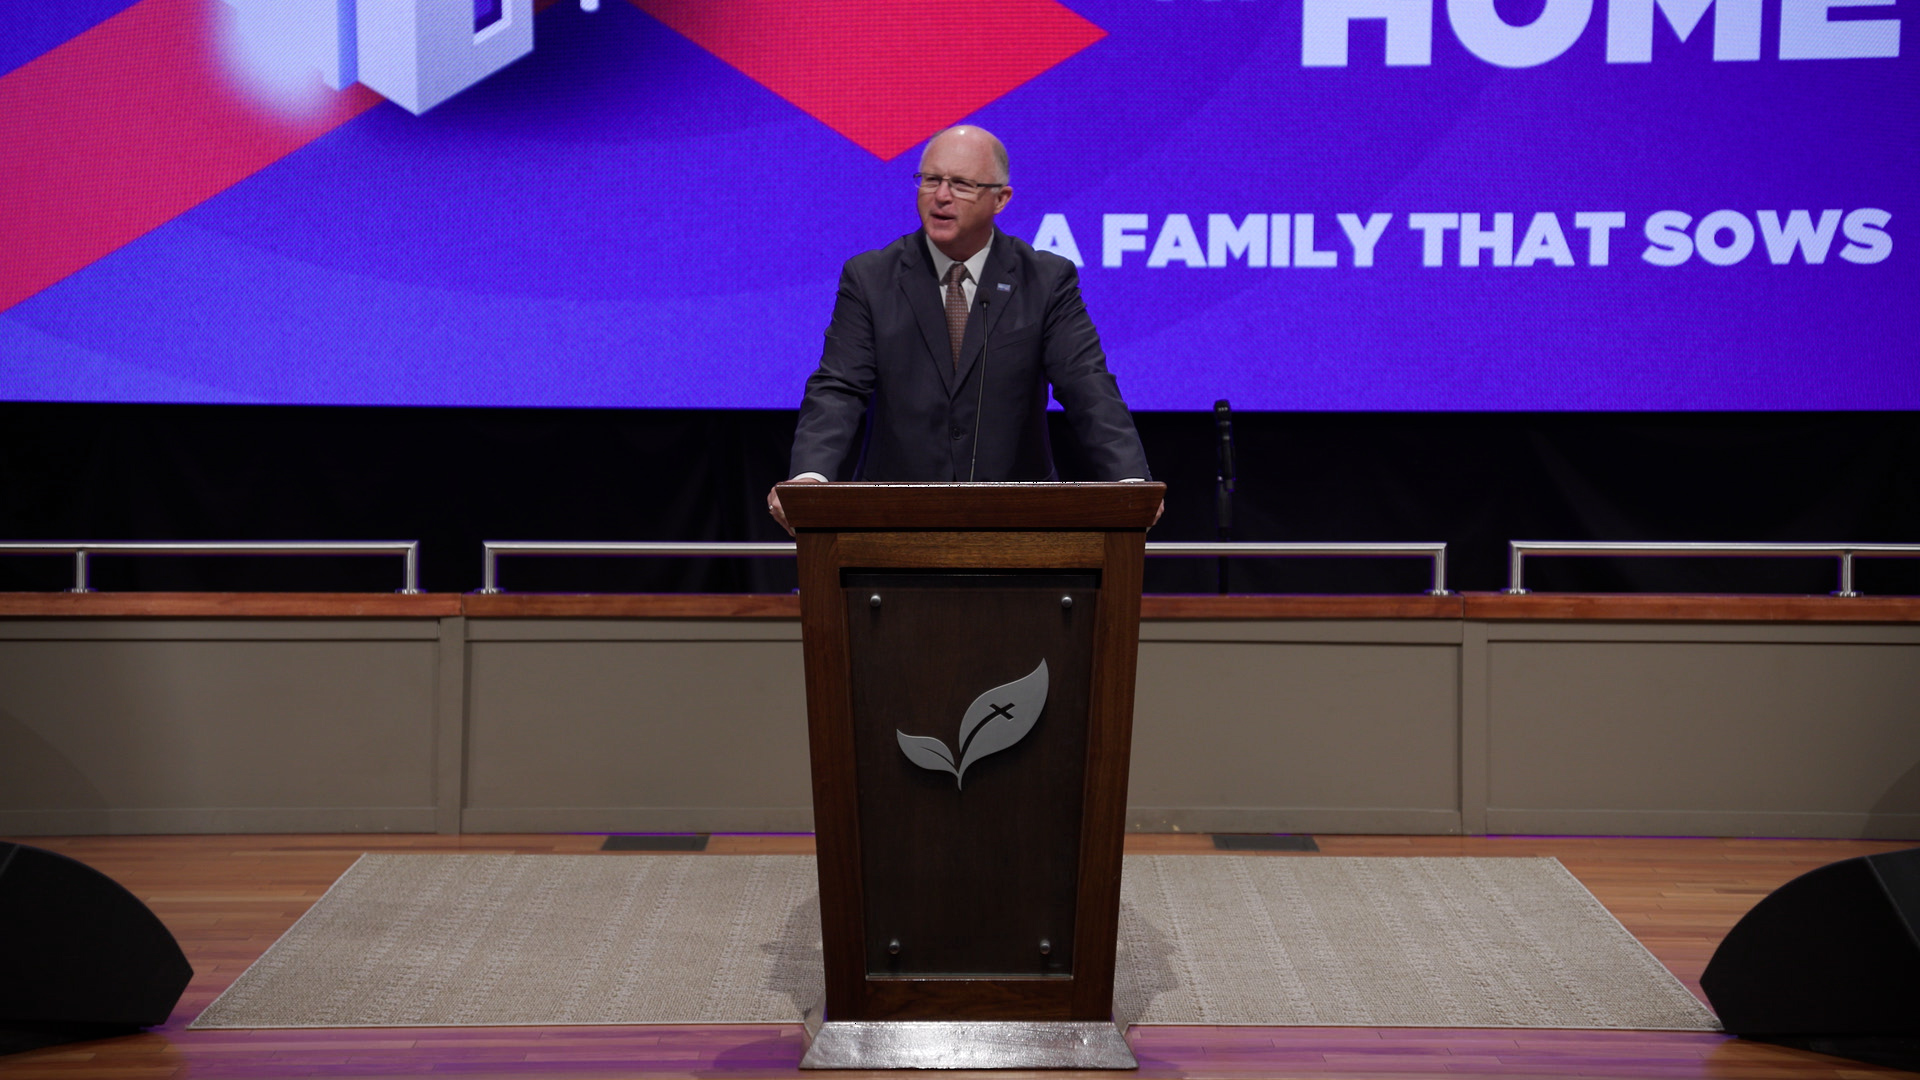 Pastor Paul Chappell: A Family That Sows